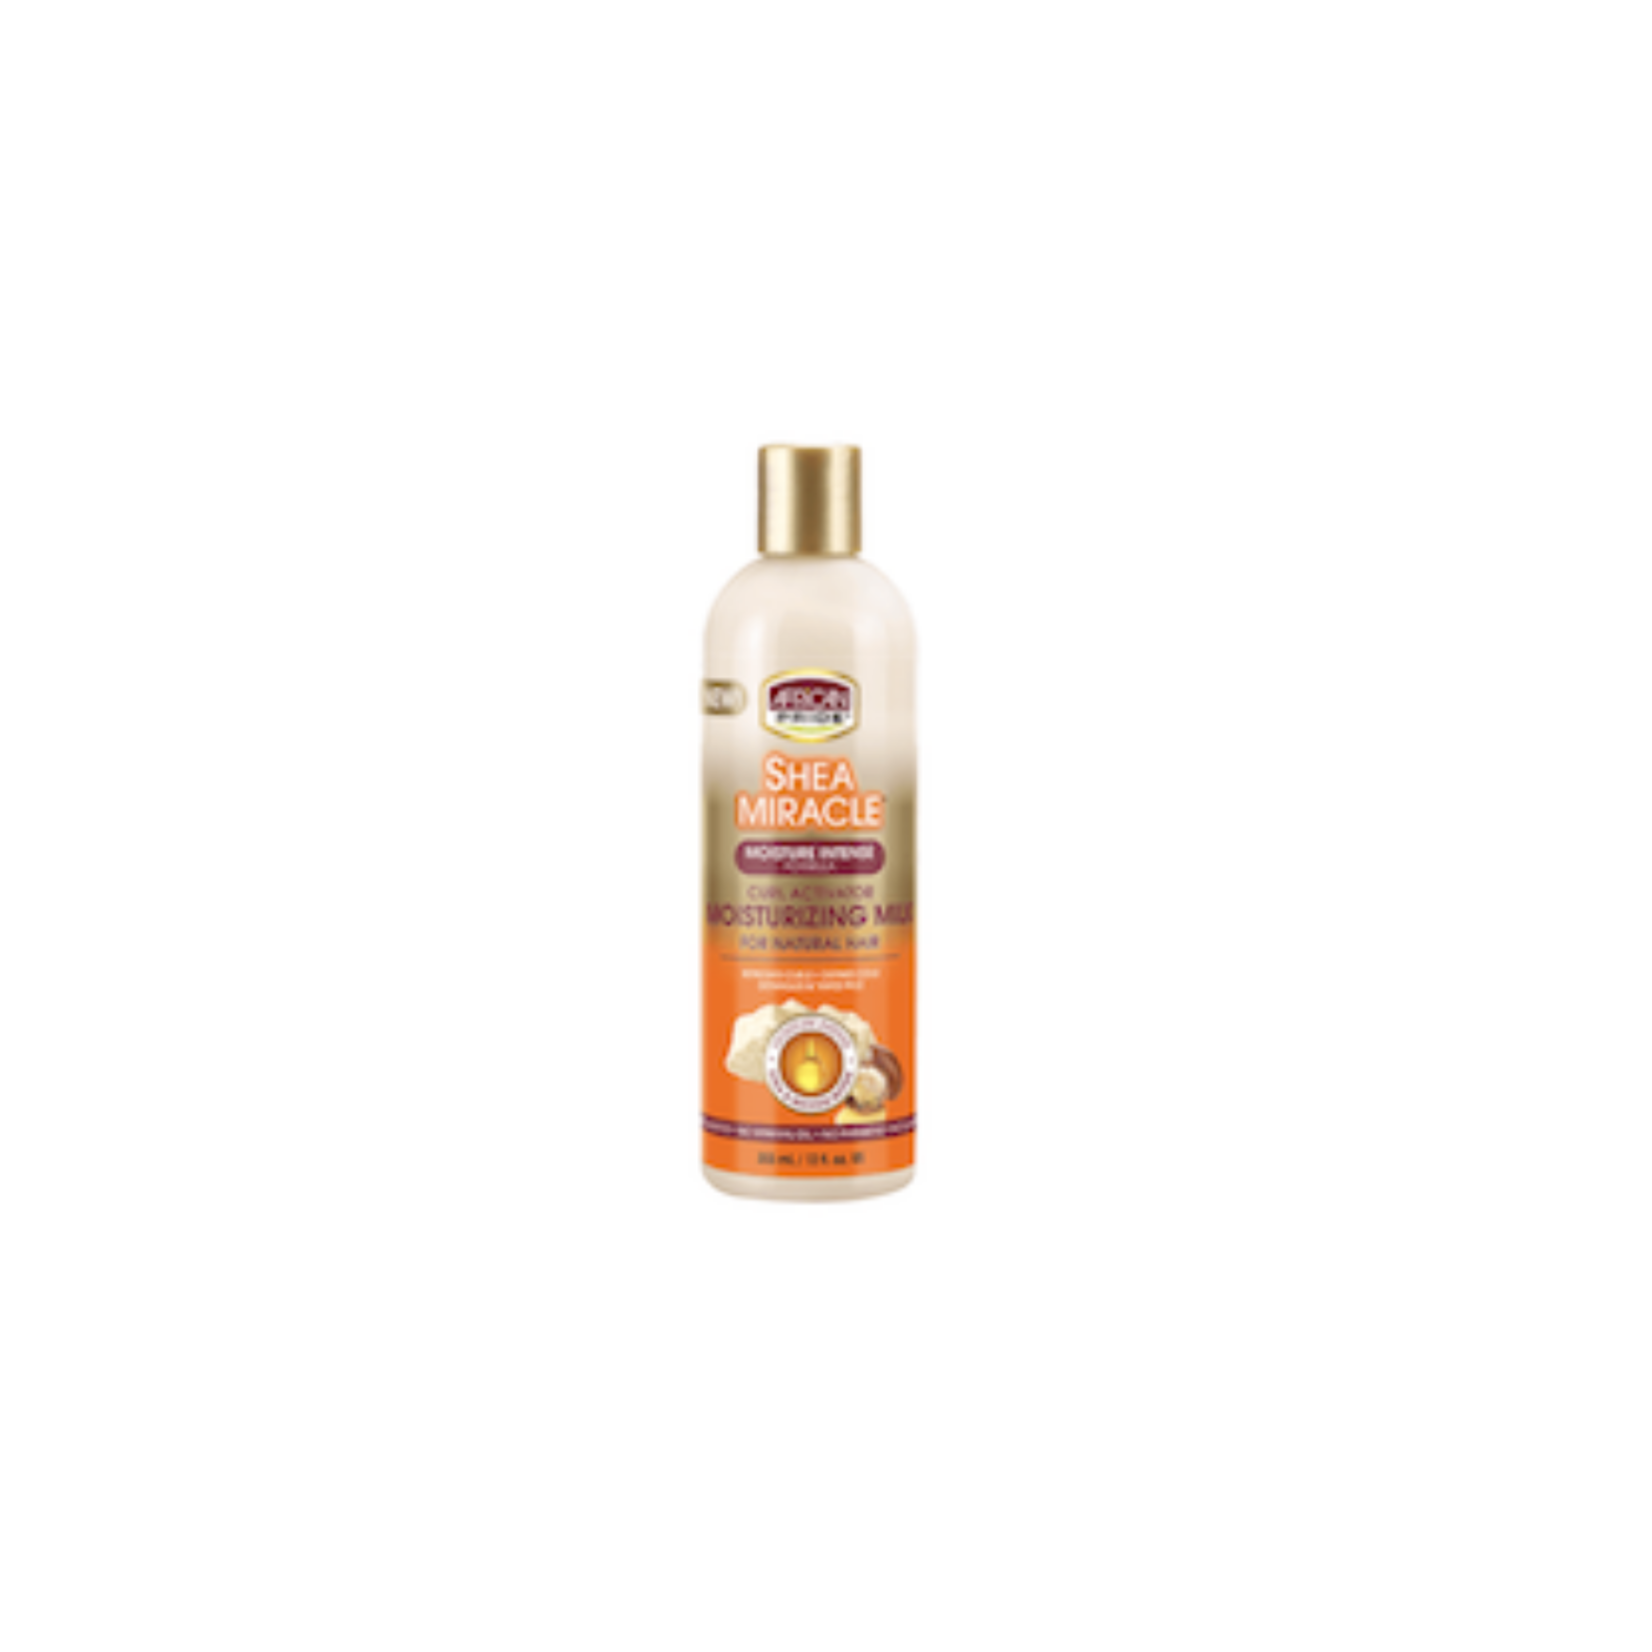 African Pride African Pride Shea Miracle Curl Activator Moisturizing Milk 12oz